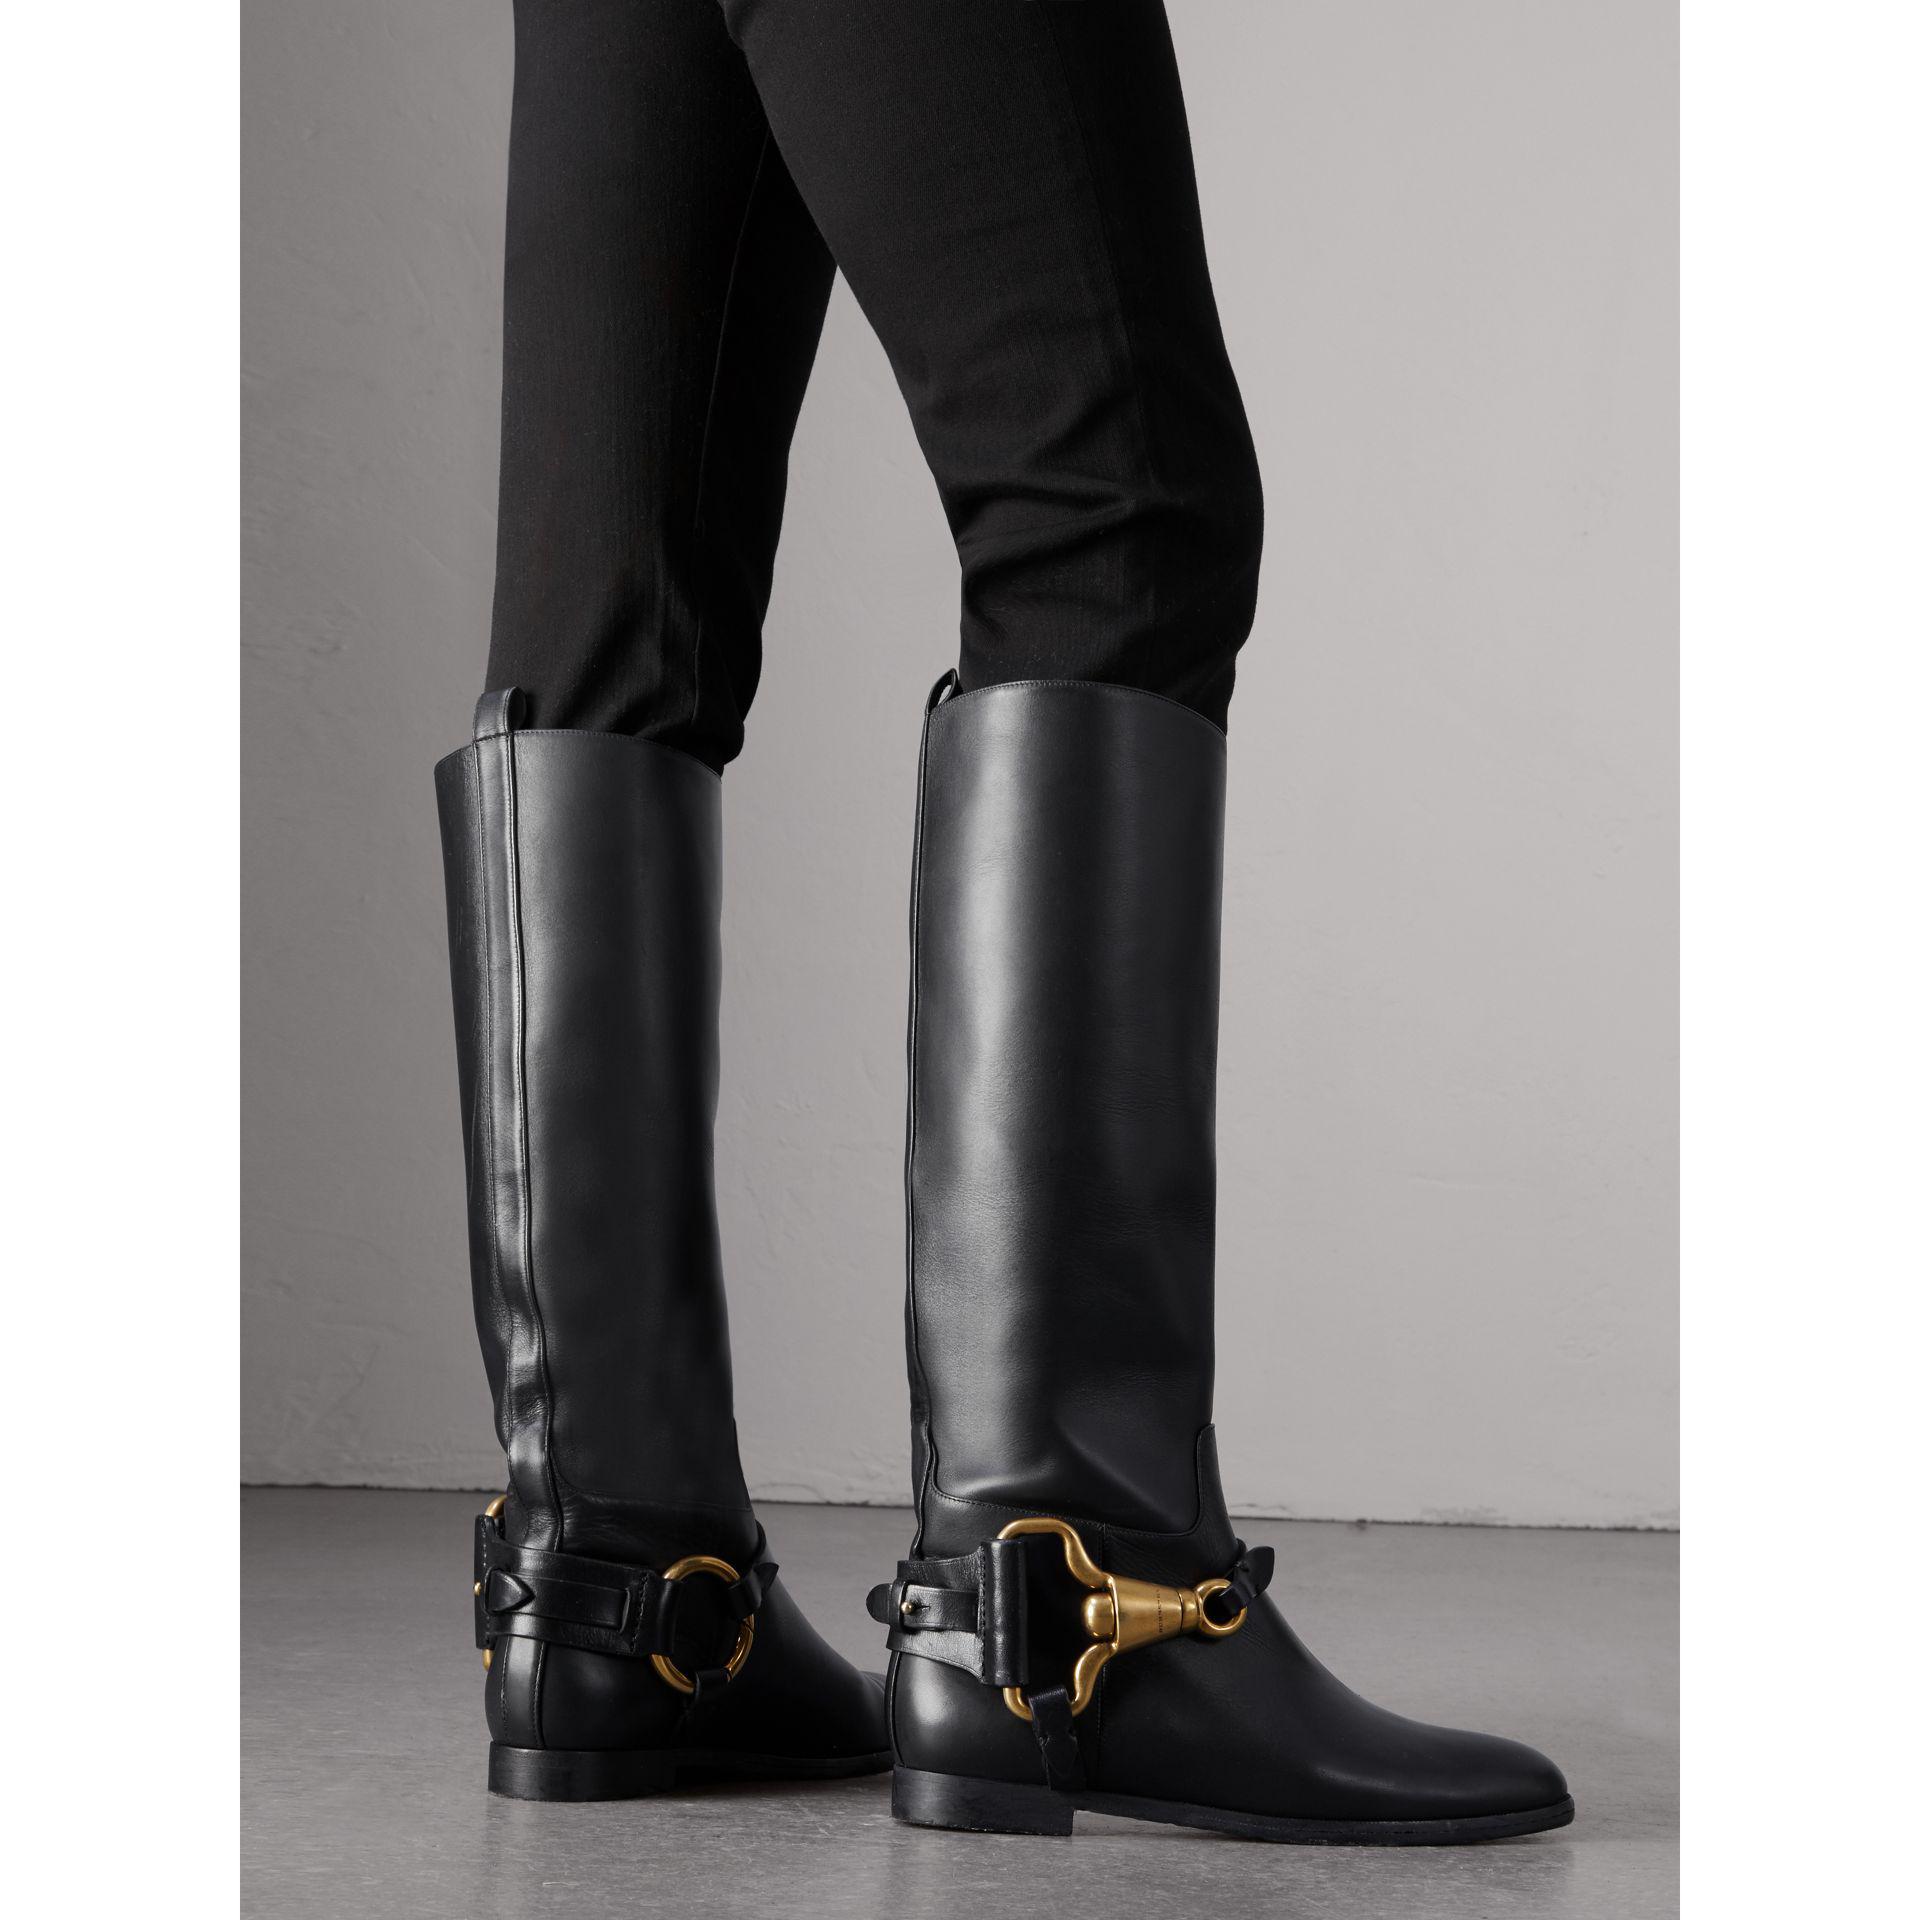 Equestrian Elegance: Burberry Leather Riding Boots - Shoe Effect